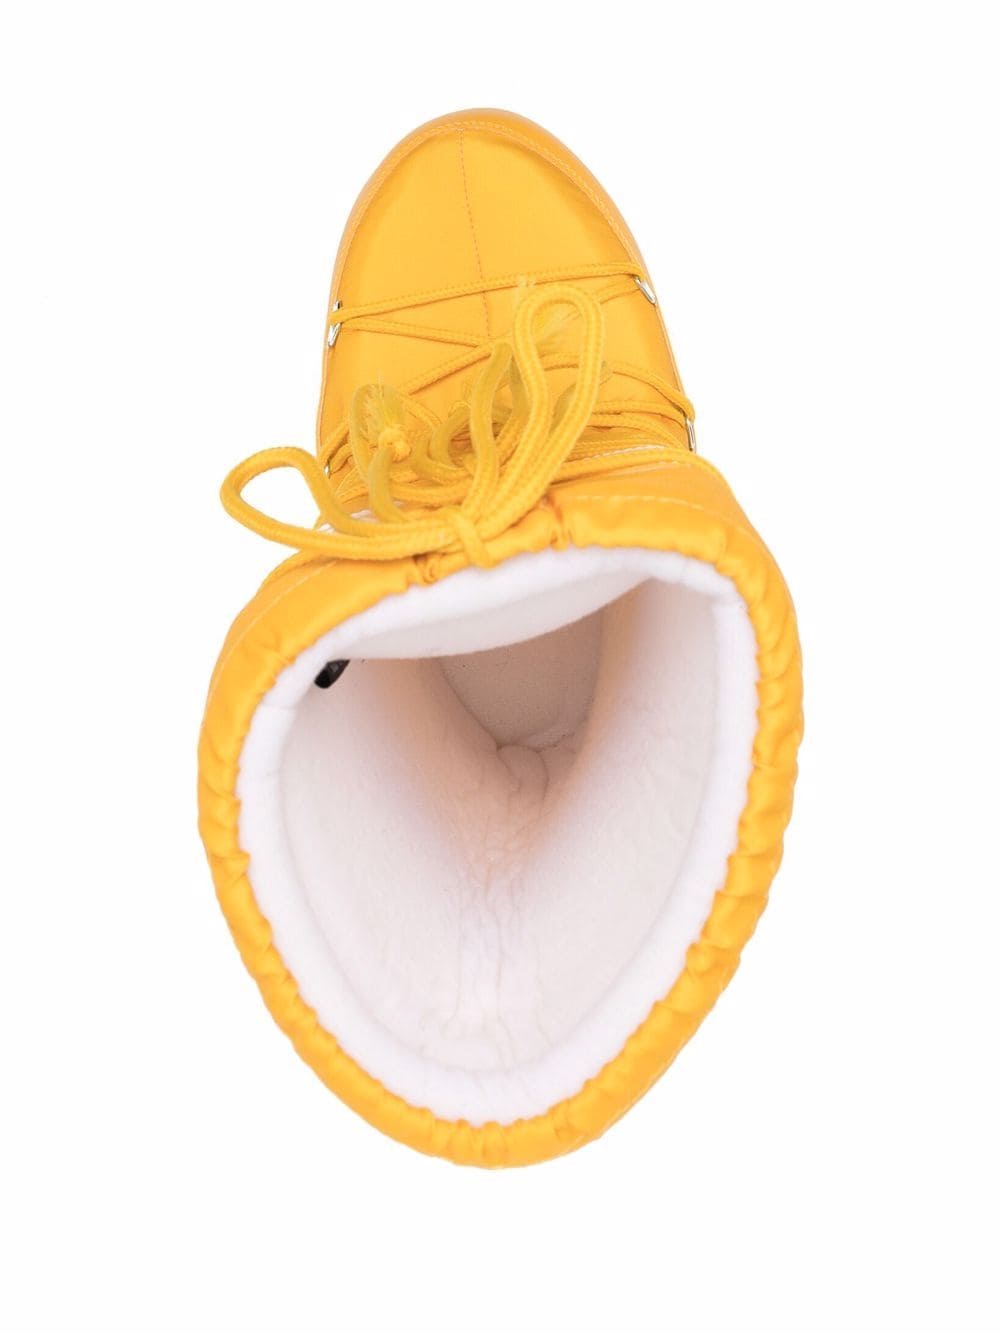 Moon Boot Boots Yellow